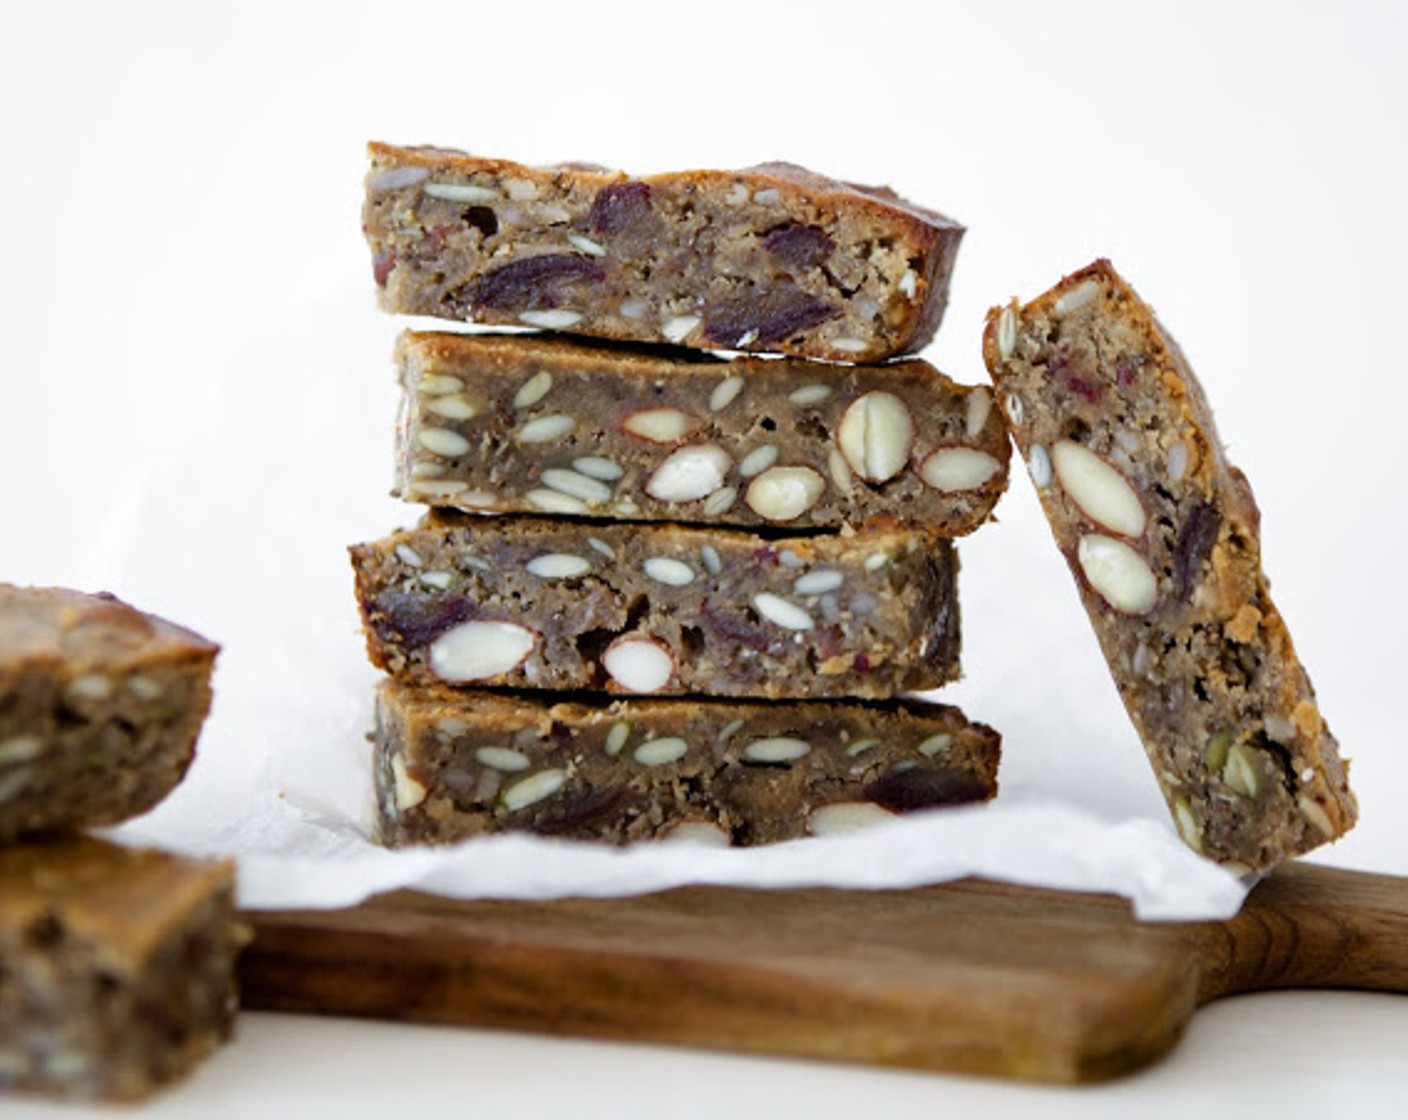 step 9 This grain free energy breakfast bar is quite dense and filling so keep the slices small. They can be stored in the freezer for a month and taken out one by one to thaw out over night in the fridge, in a hurry, I have eaten them straight from the freezer too! Enjoy!